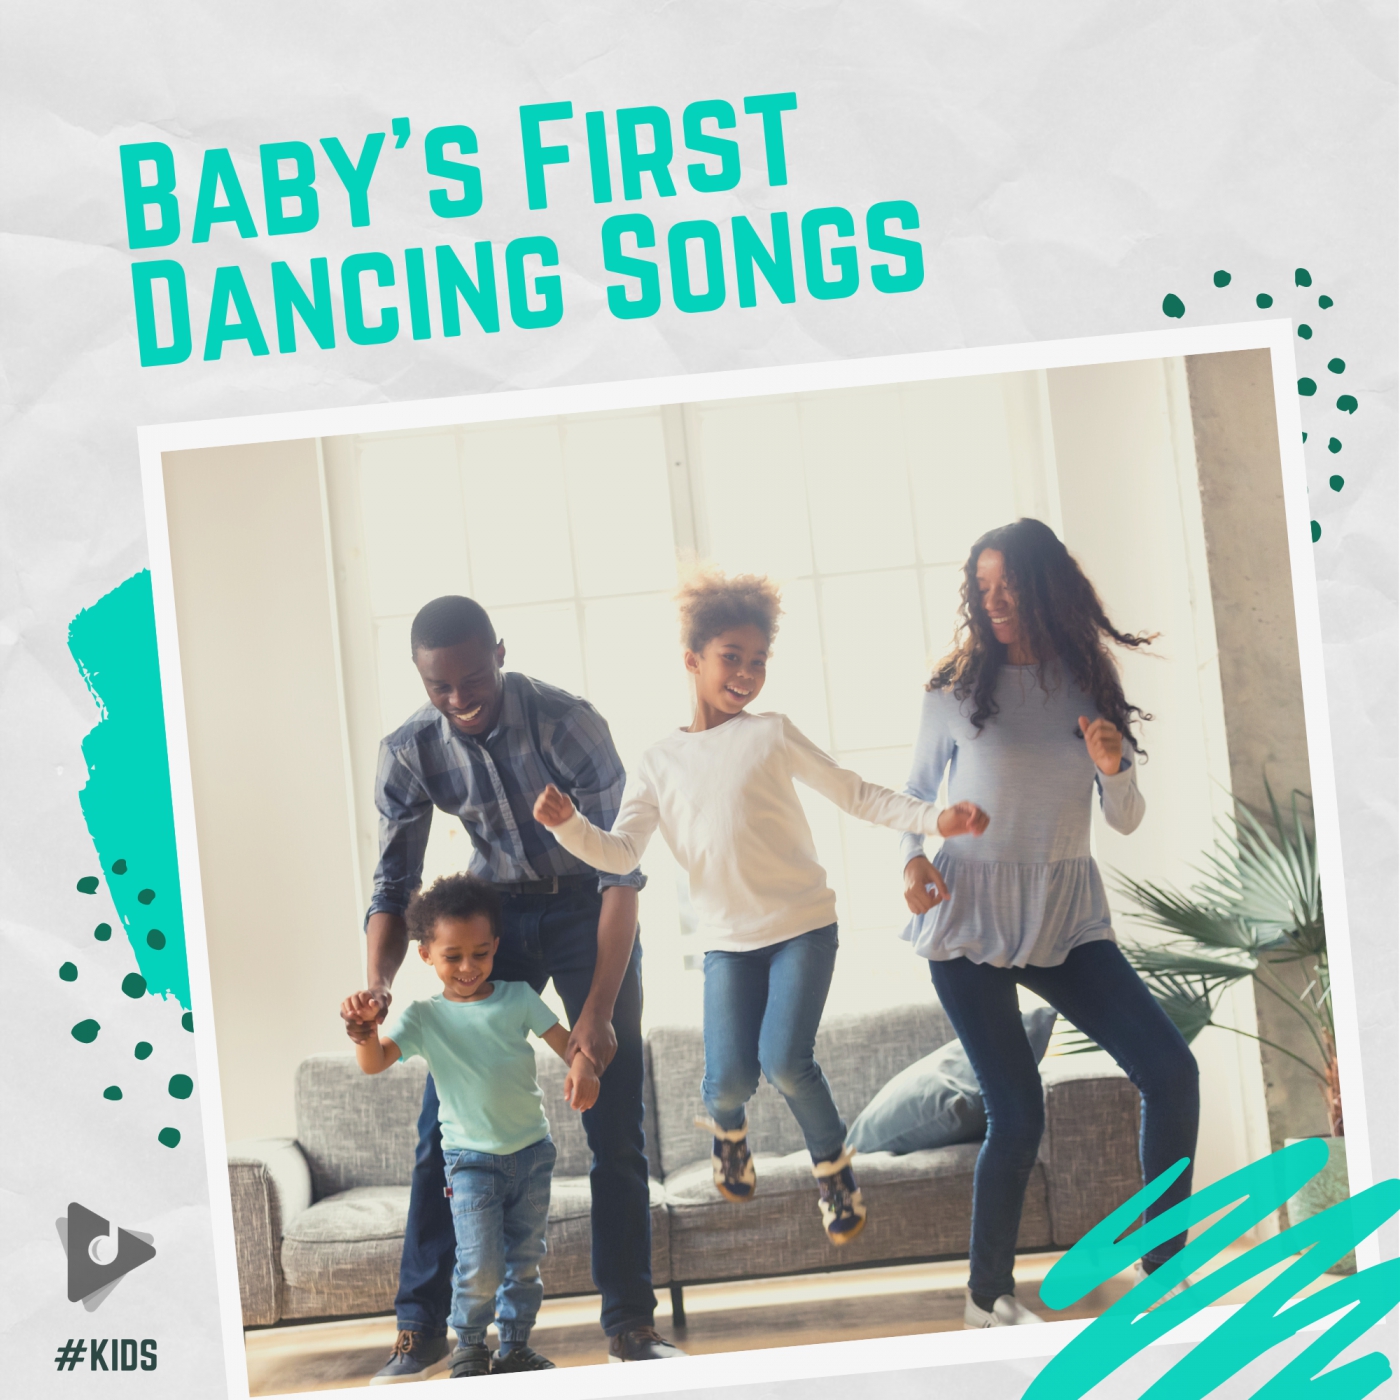 Baby's First Dancing Songs